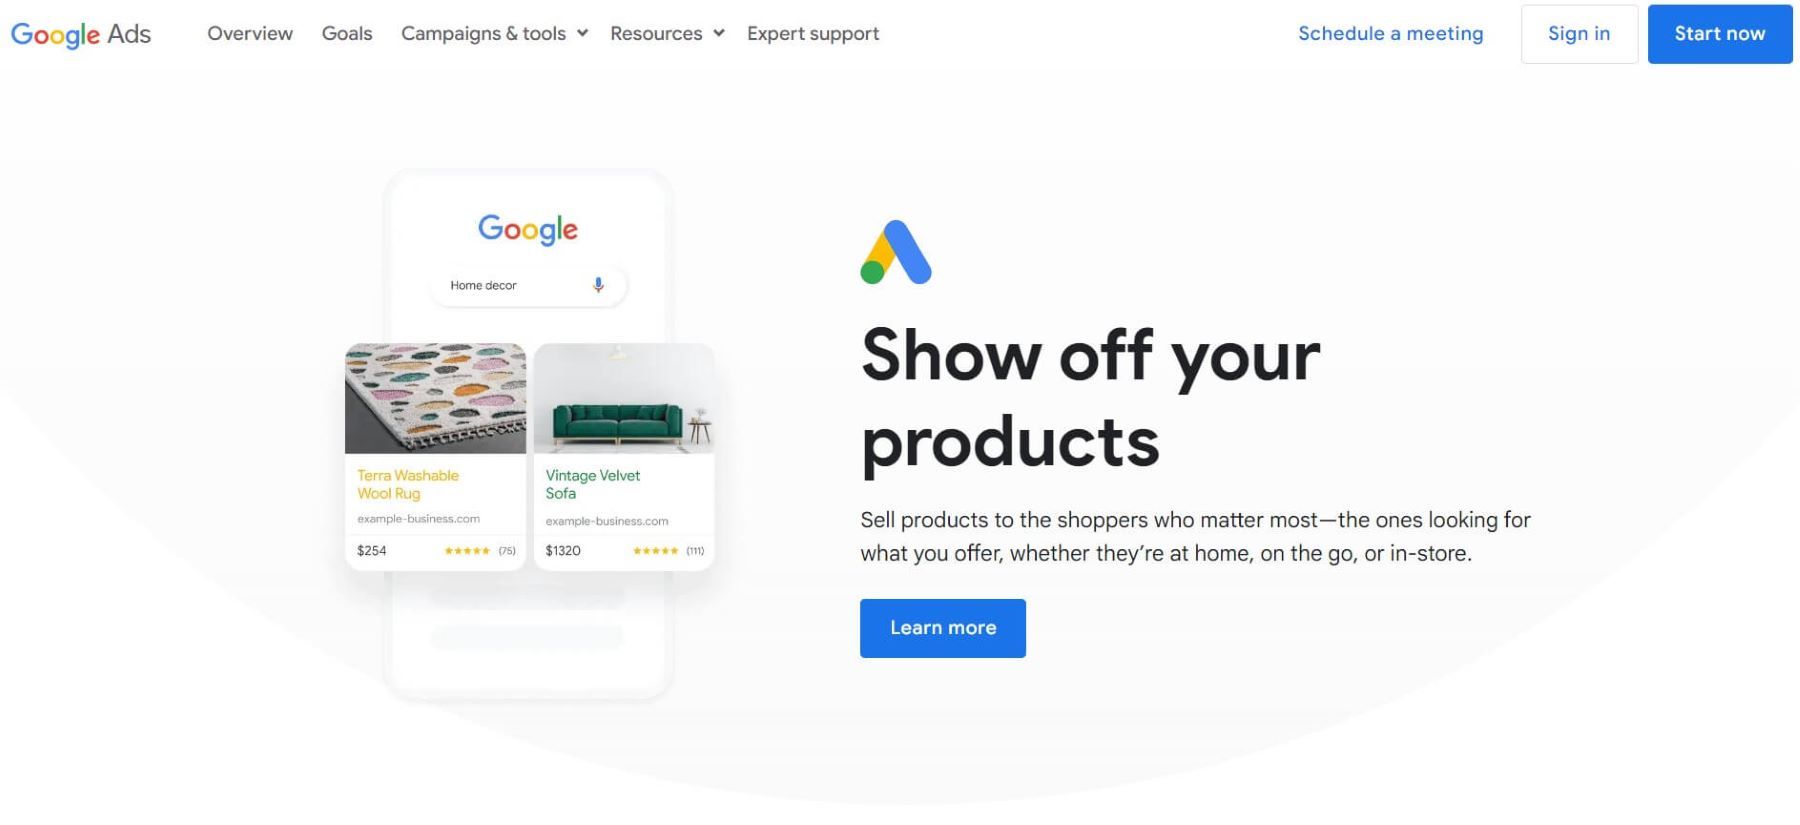 Google Shopping Ads can be a great tool to promote your new POD business